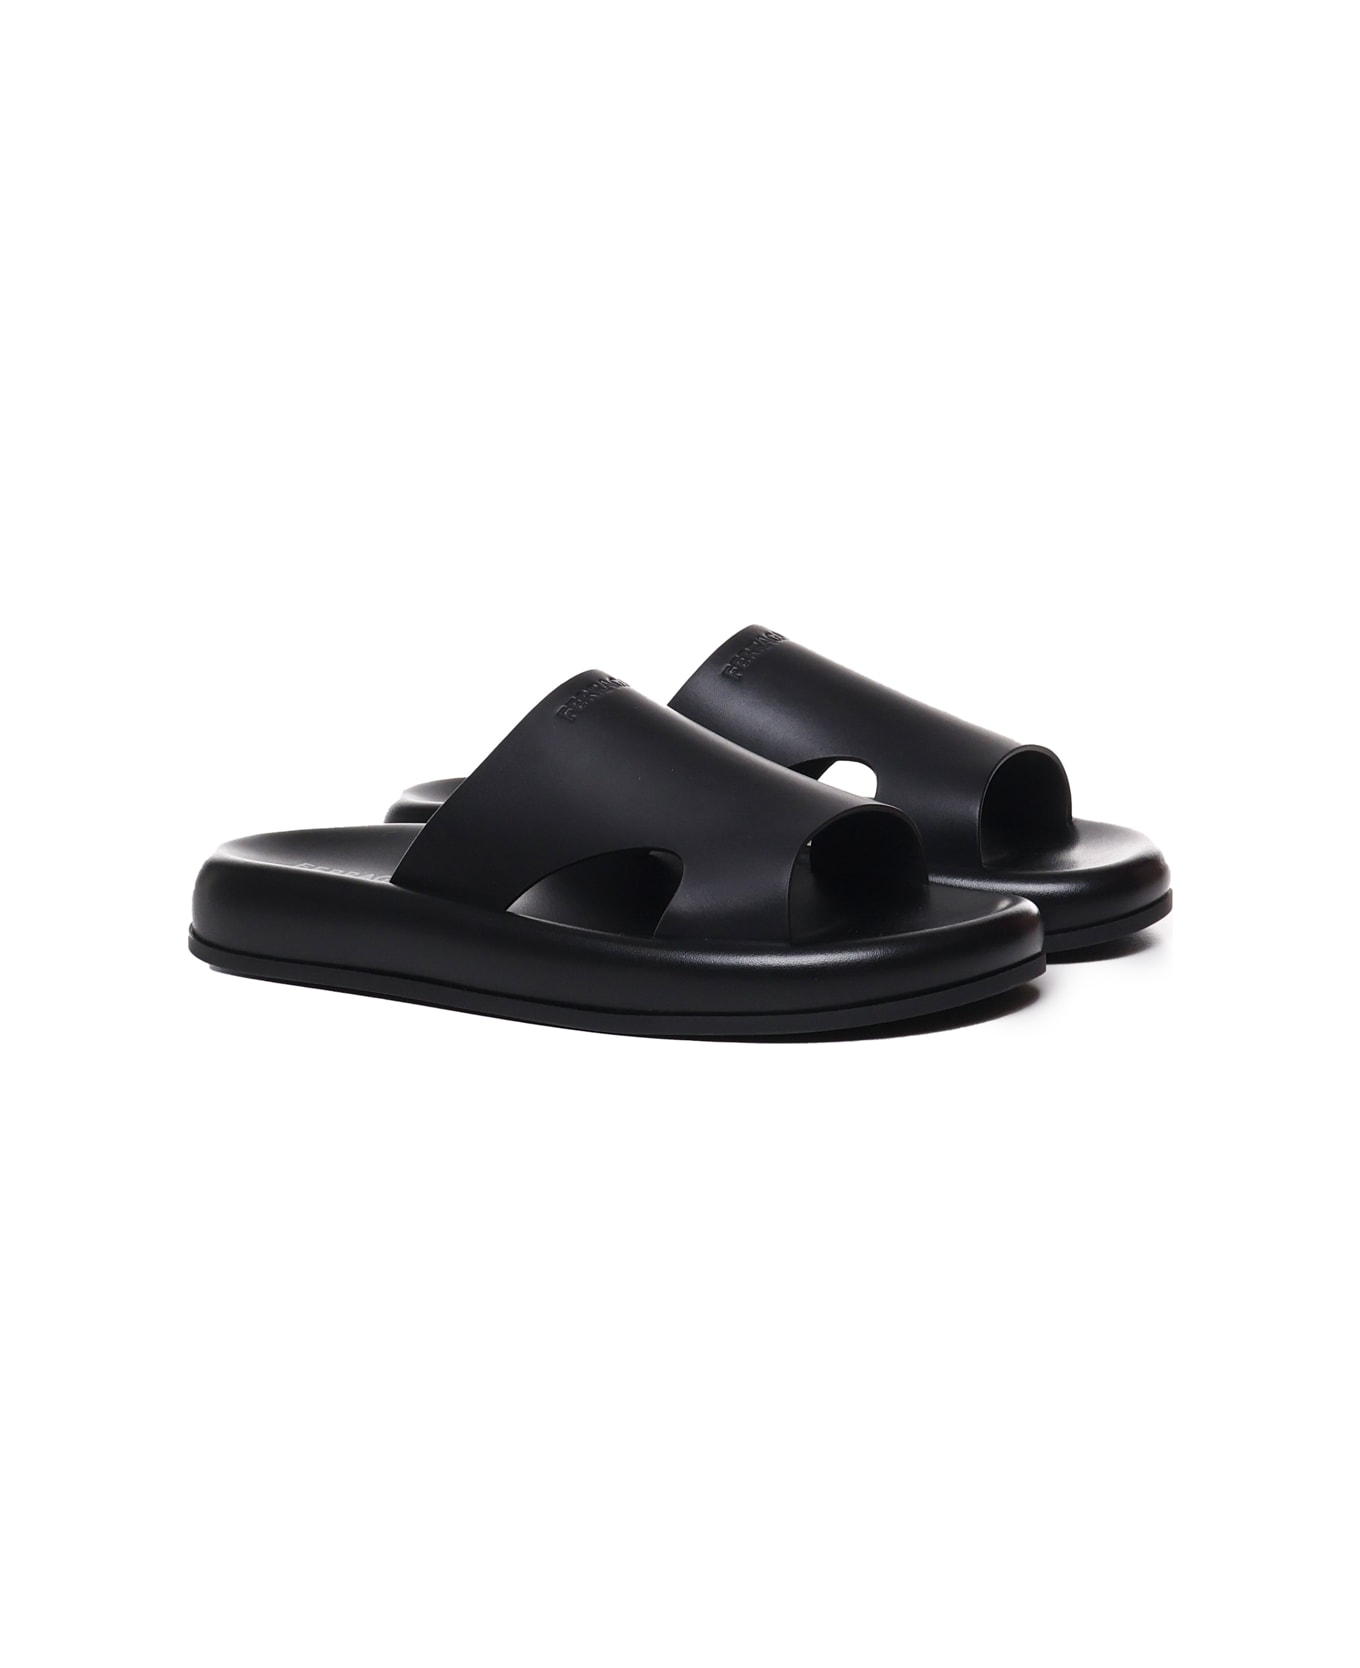 Ferragamo Sandals With Cut-out Detail - Black その他各種シューズ